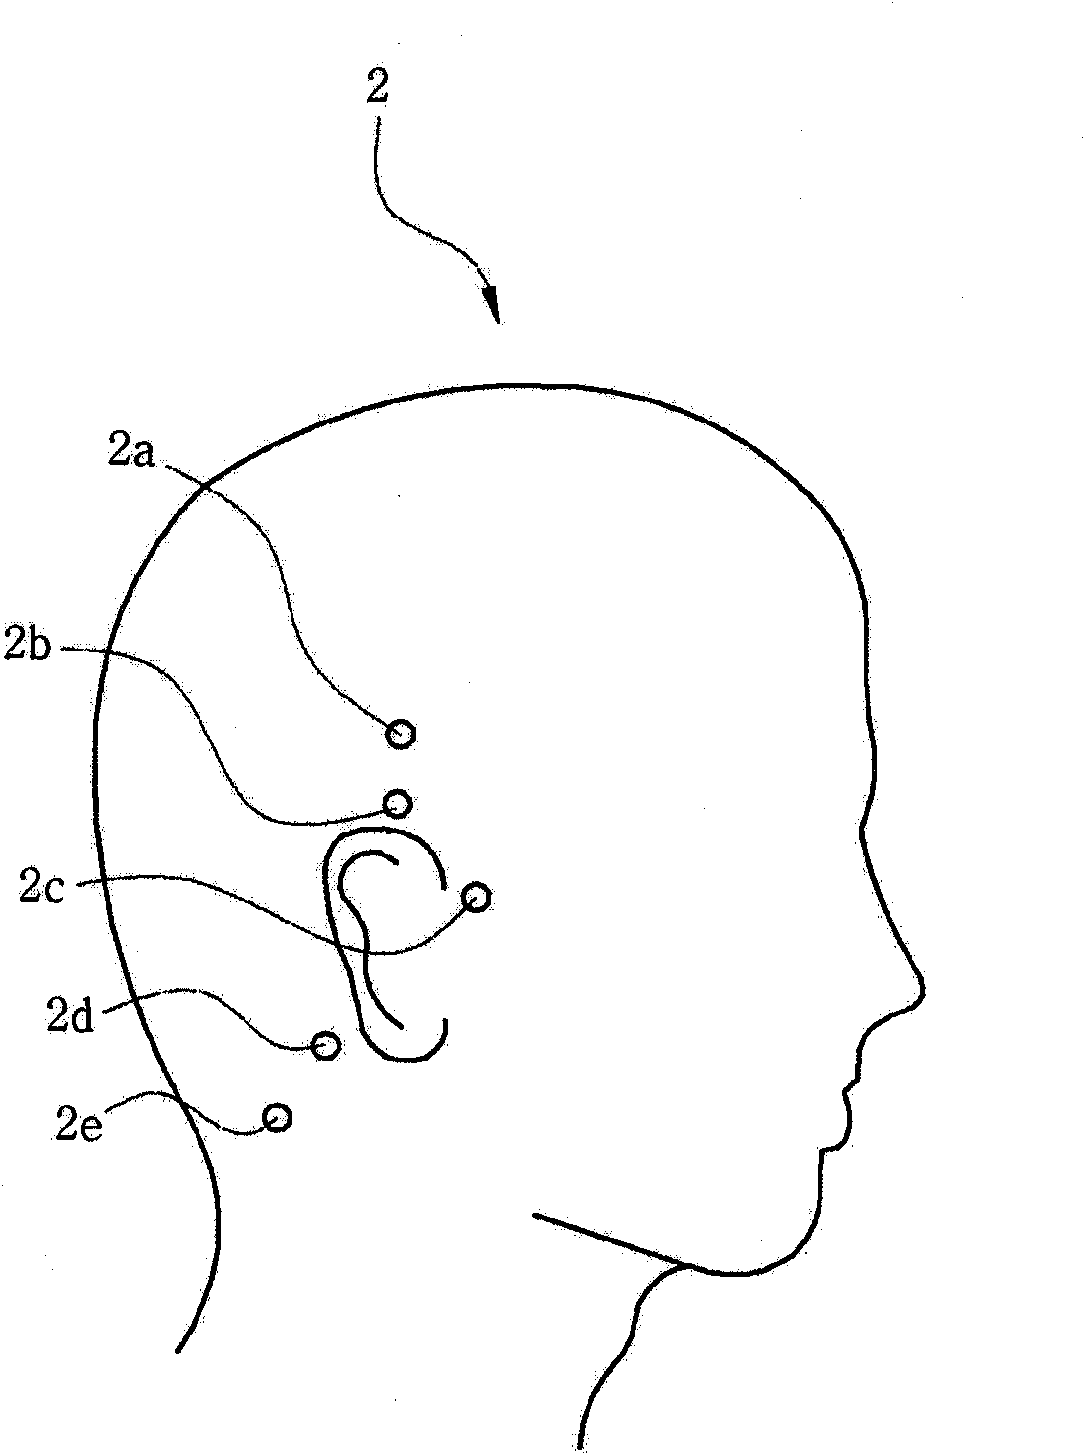 Pillow-type massage device for massaging acupuncture points of the body of a user